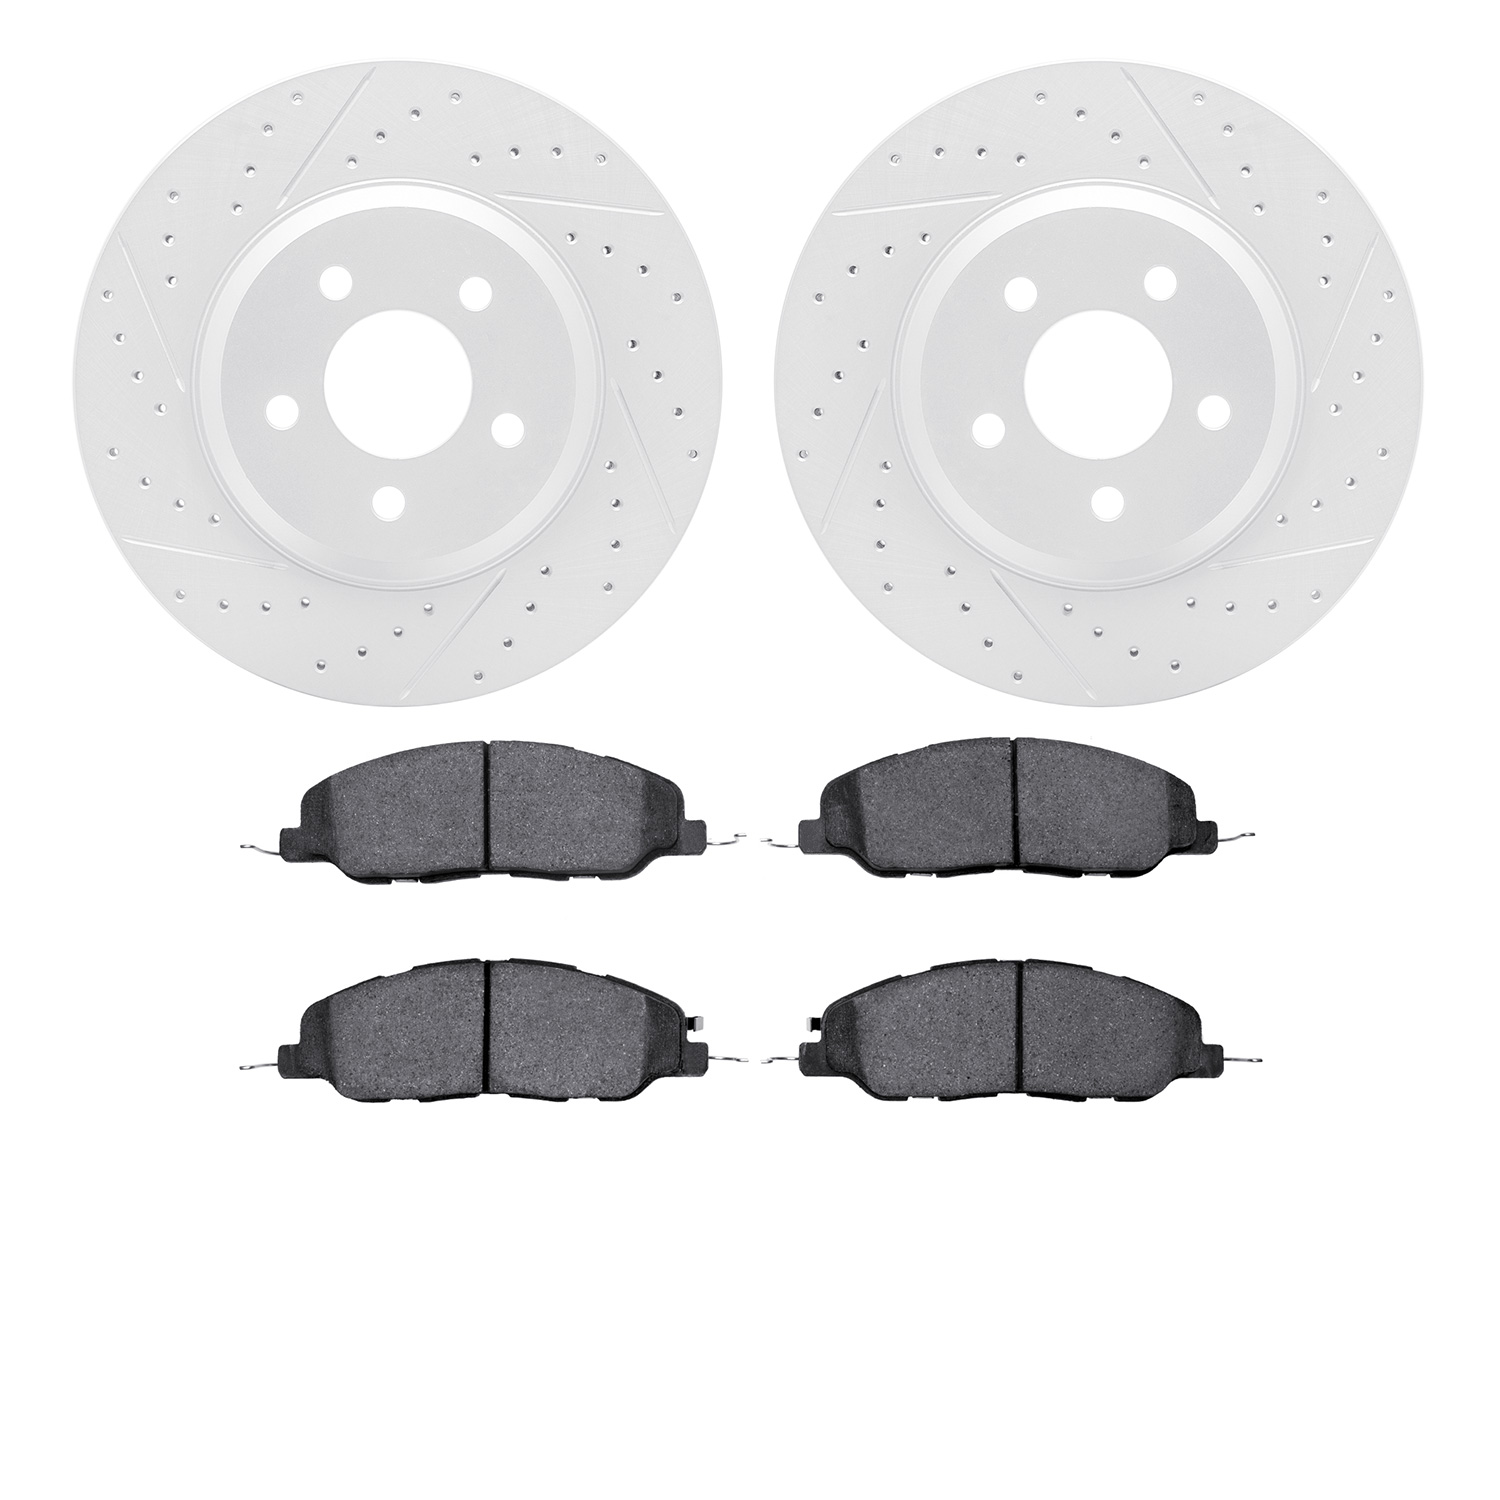 2502-54044 Geoperformance Drilled/Slotted Rotors w/5000 Advanced Brake Pads Kit, 2005-2014 Ford/Lincoln/Mercury/Mazda, Position: